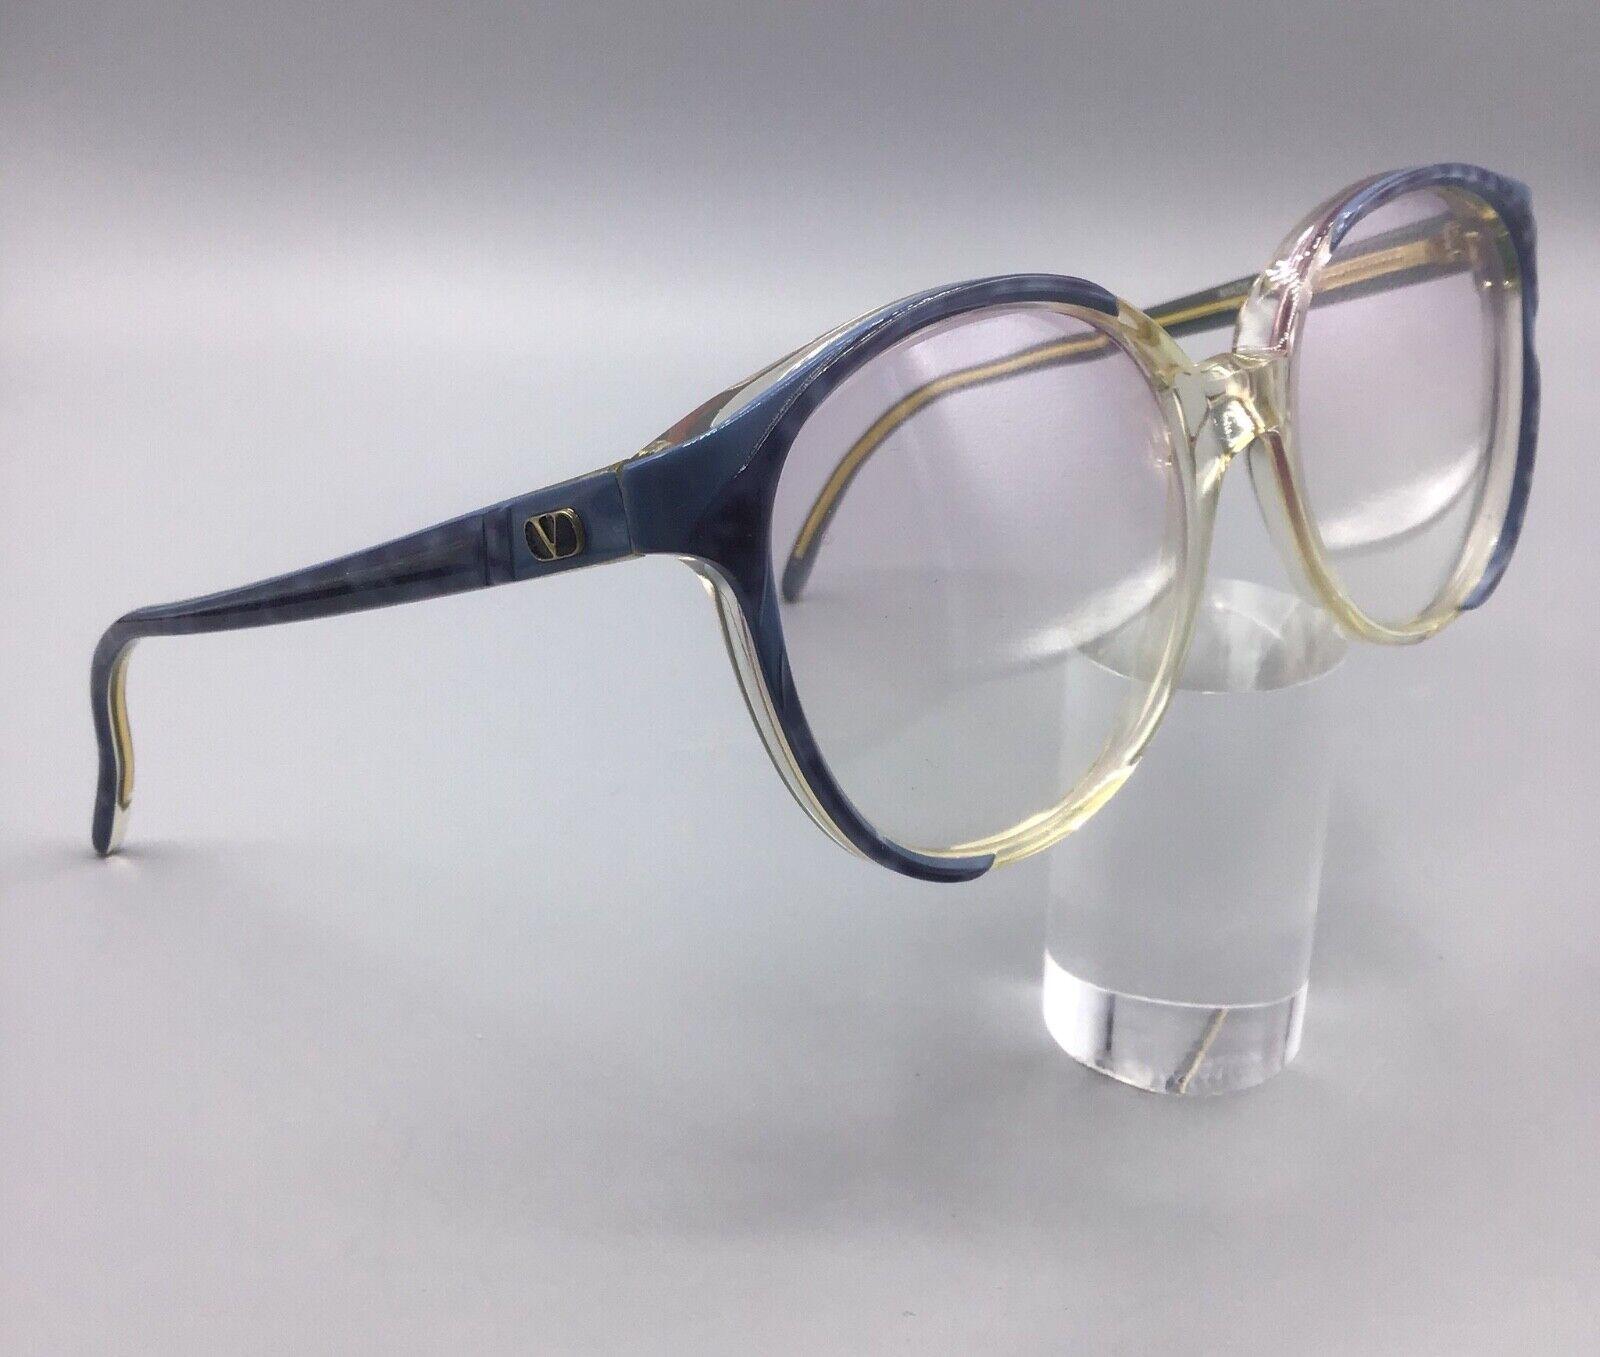 Valentino occhiale vintage 116 C7 Made in Italy brillen lunettes